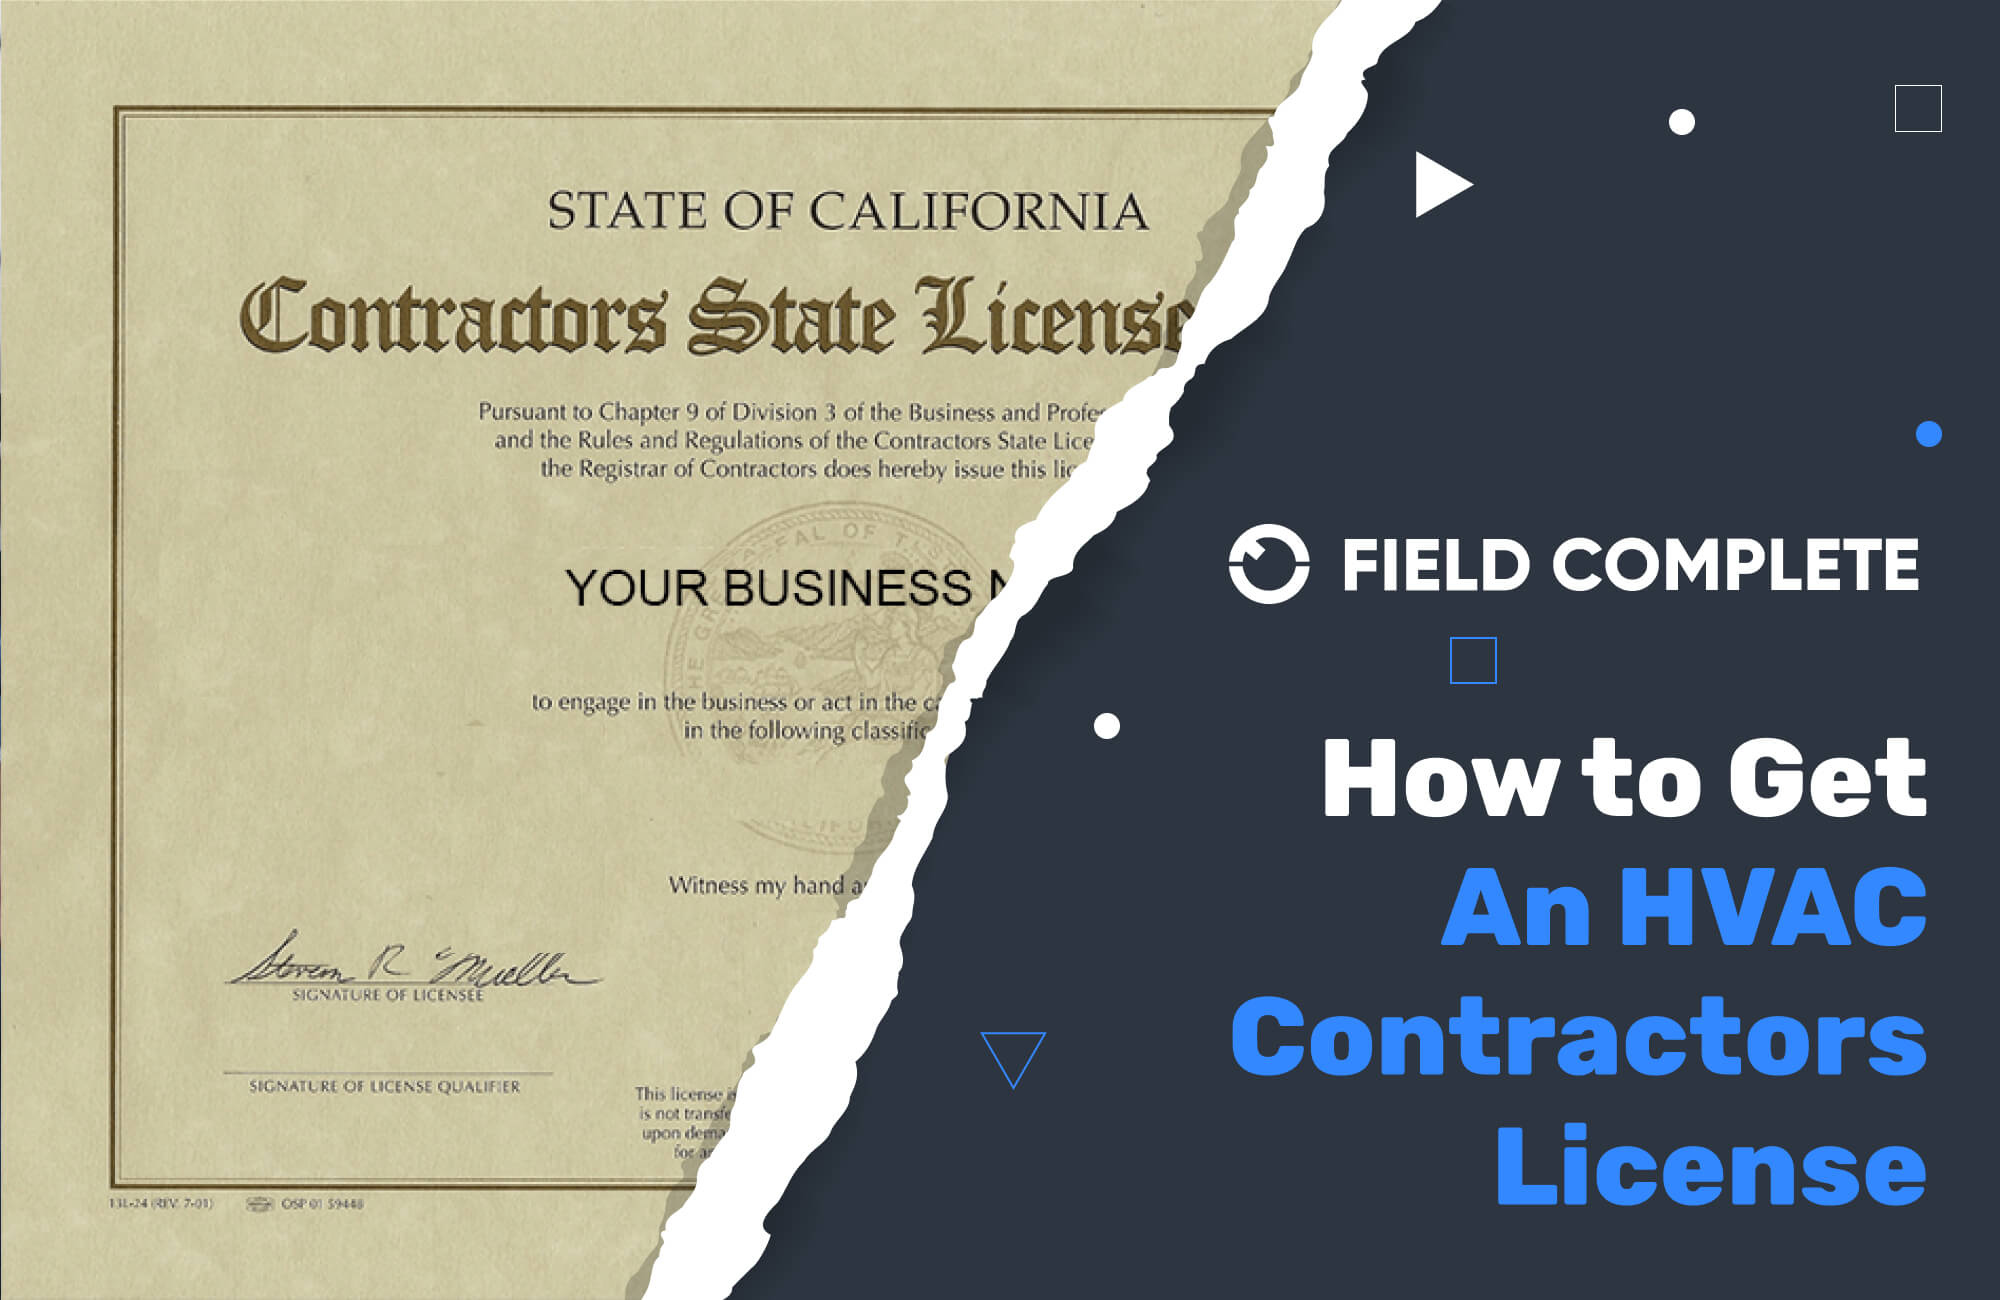 The Ultimate Guide To Getting An HVAC Contractors License